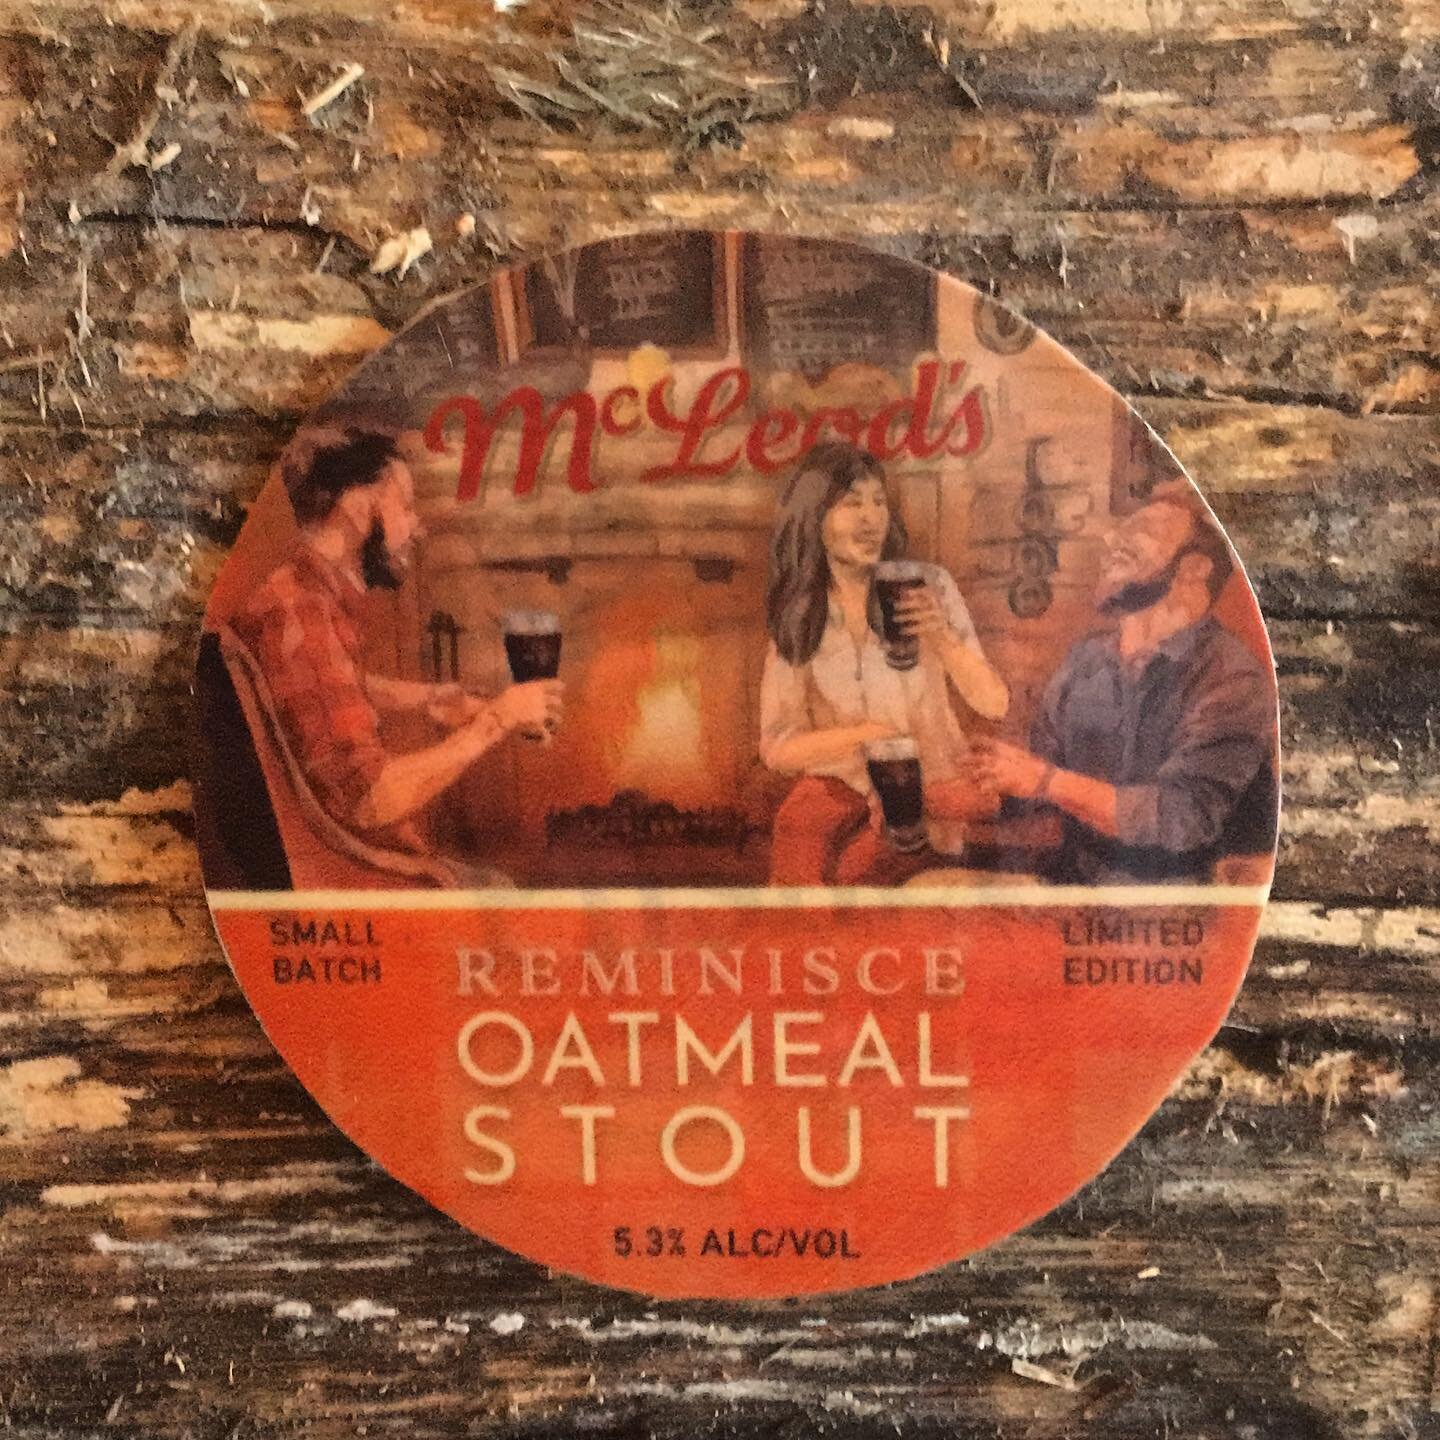 Today we&rsquo;re pouring @mcleodsbrewerynz Reminisce Oatmeal Stout.